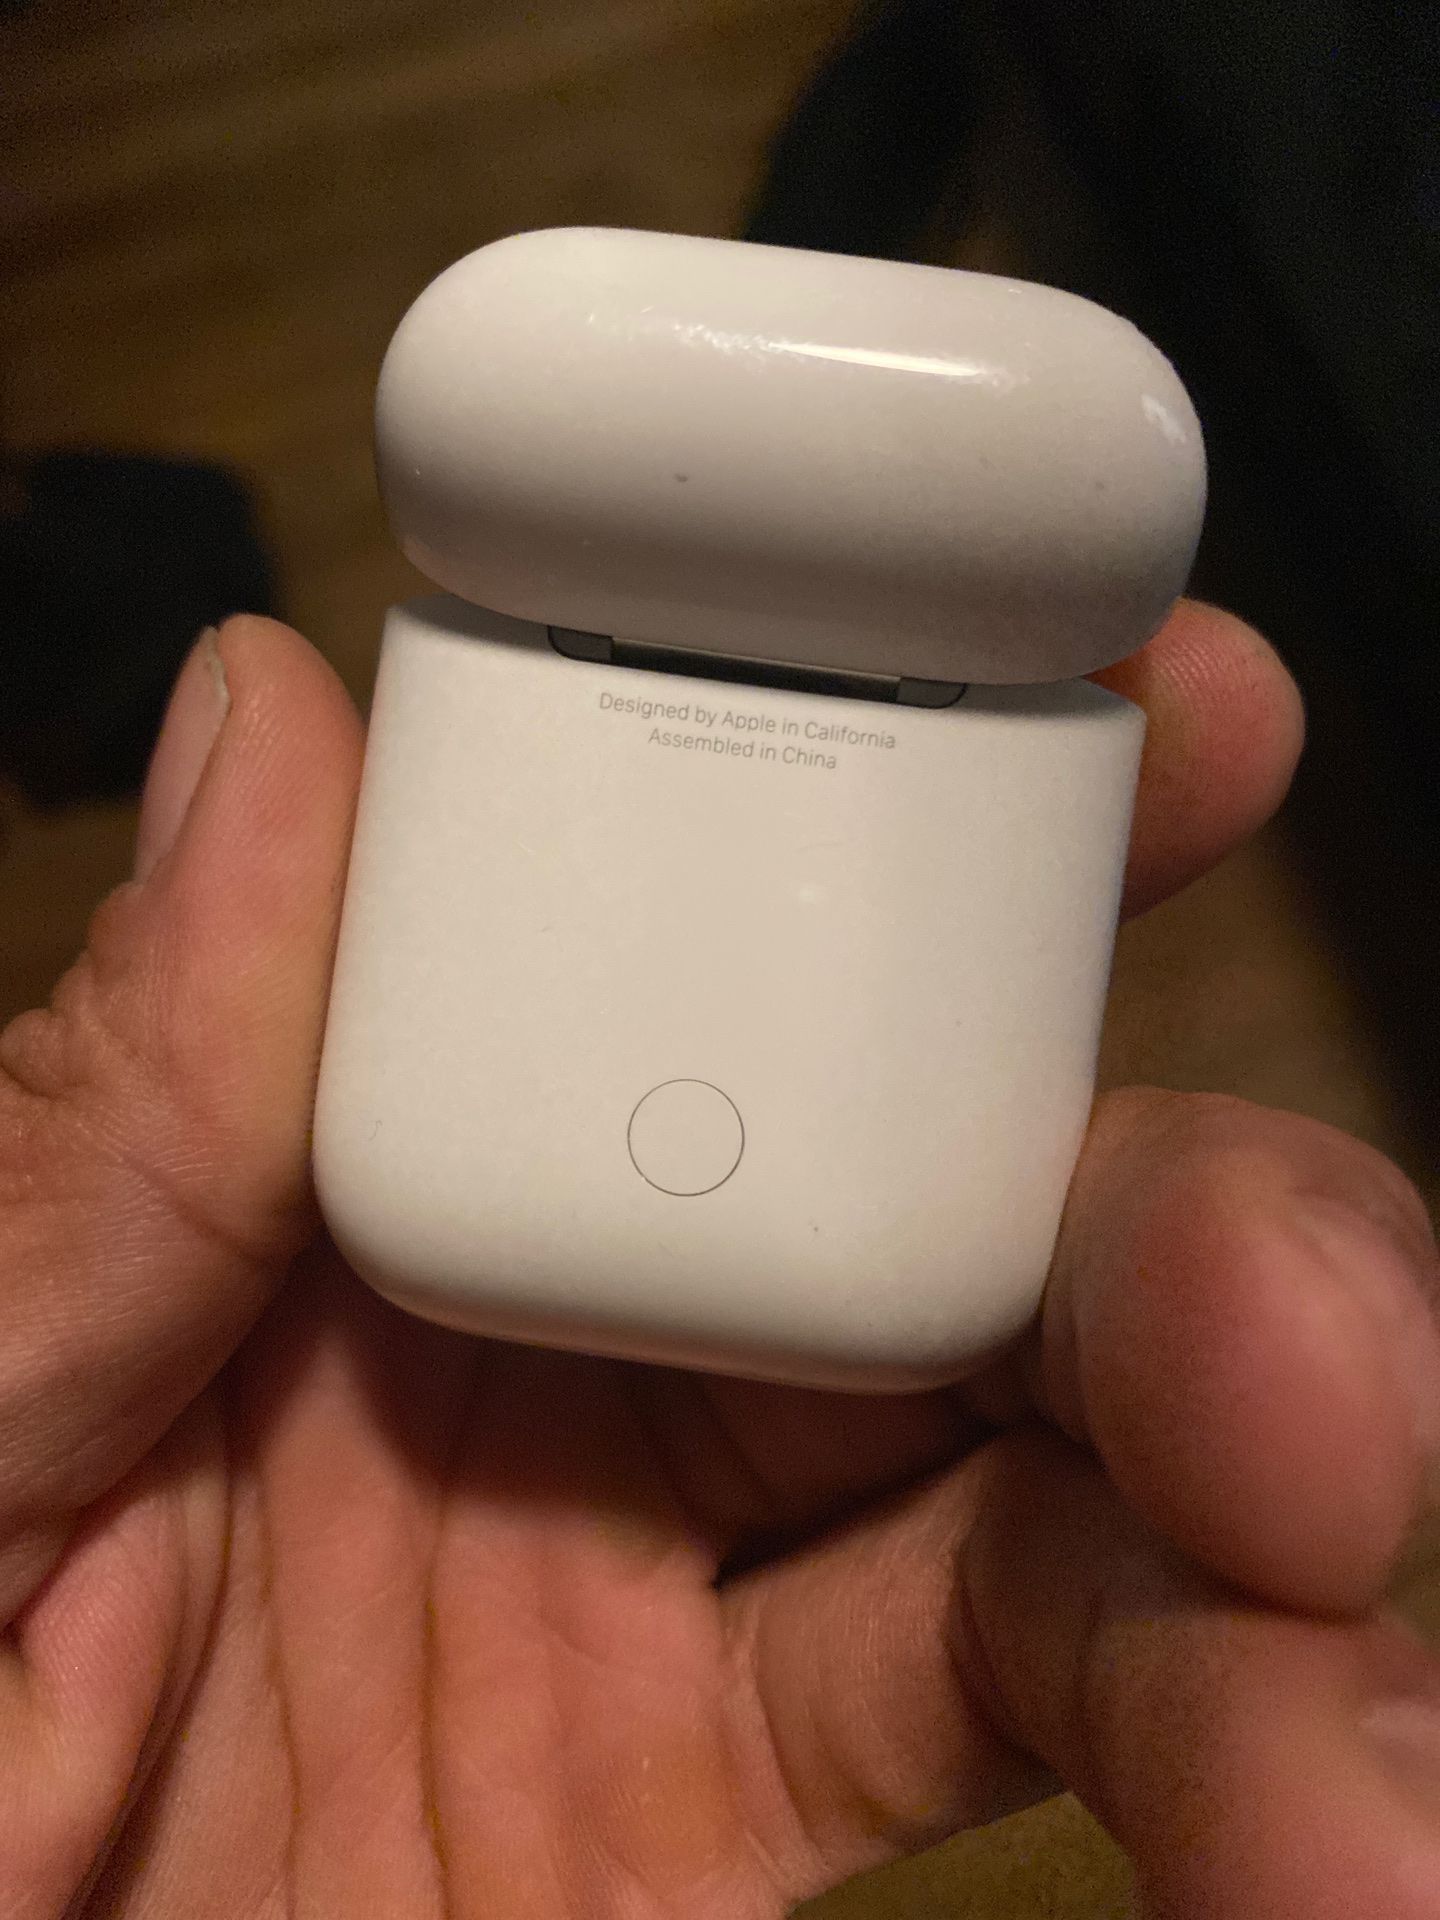 Apple AirPod missing one